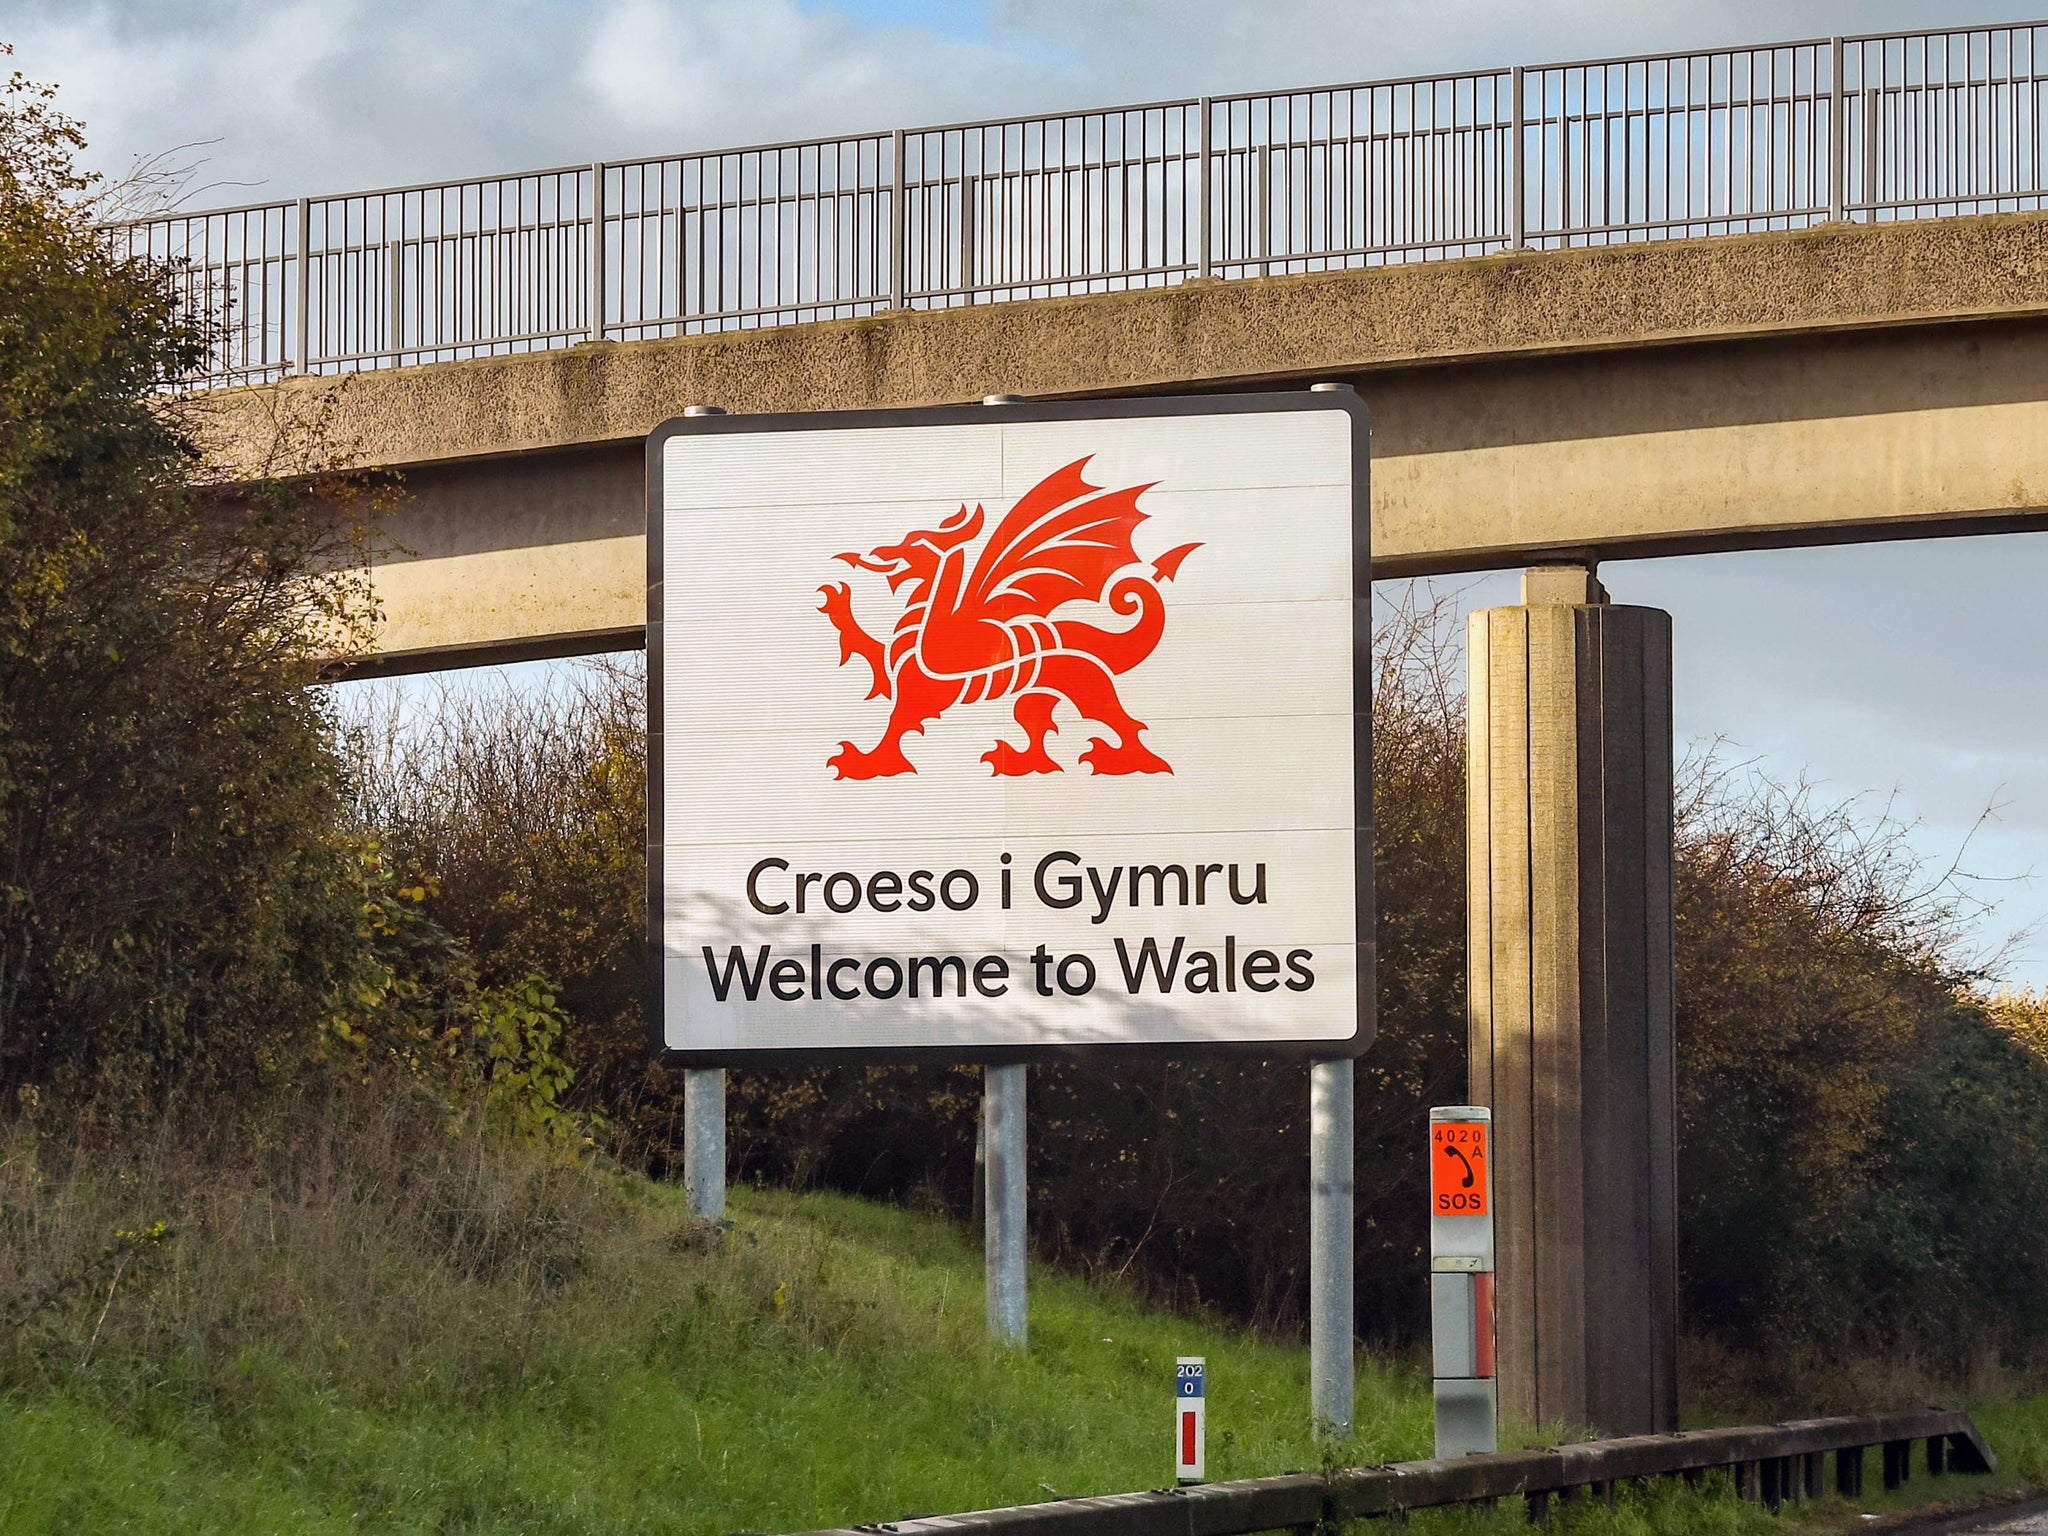 The Welsh language was almost lost completely